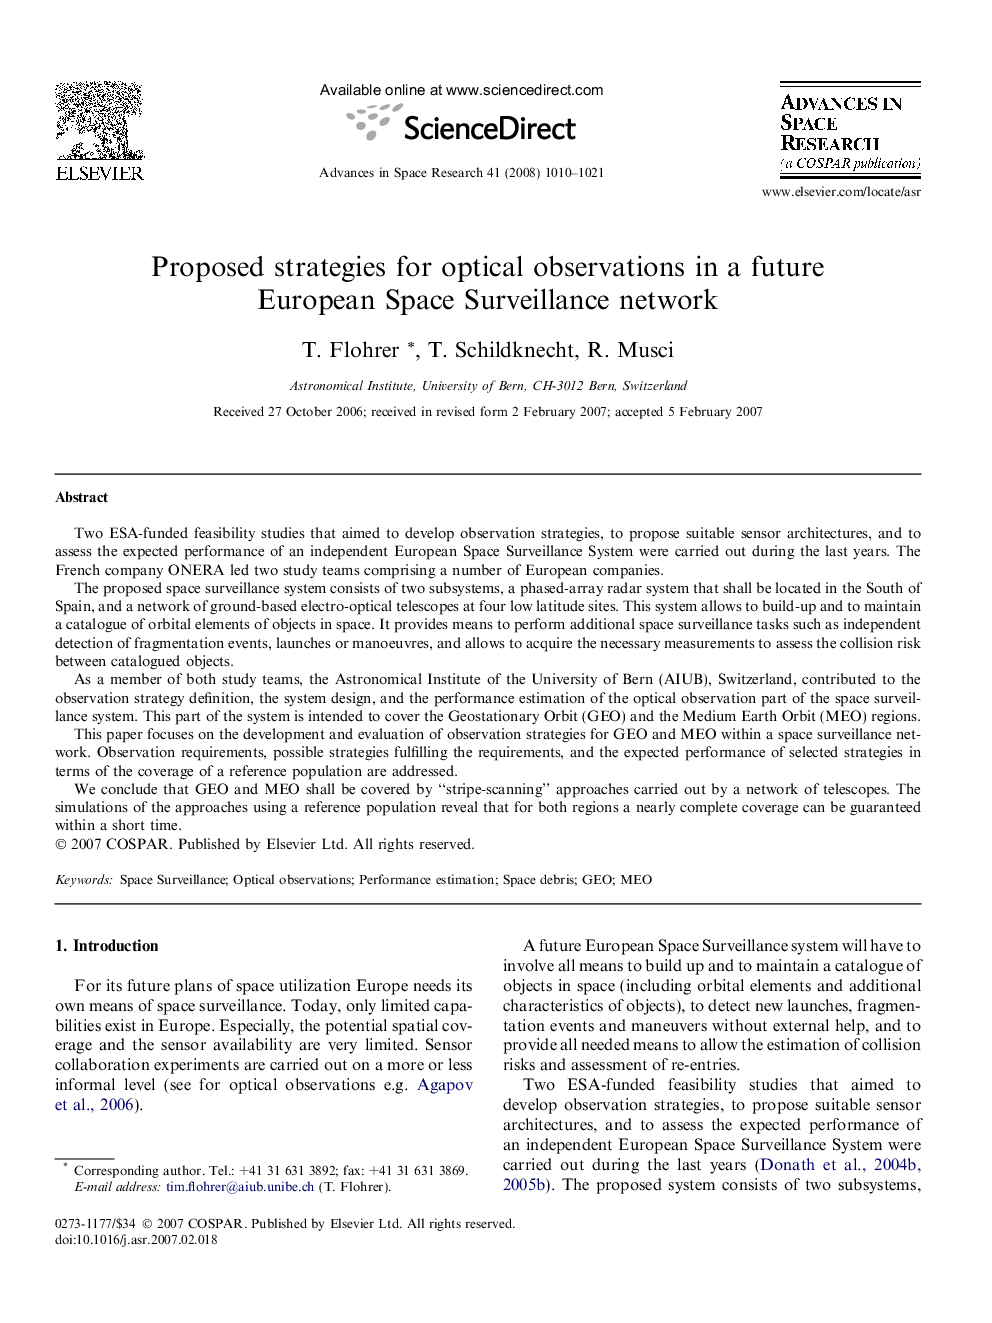 Proposed strategies for optical observations in a future European Space Surveillance network